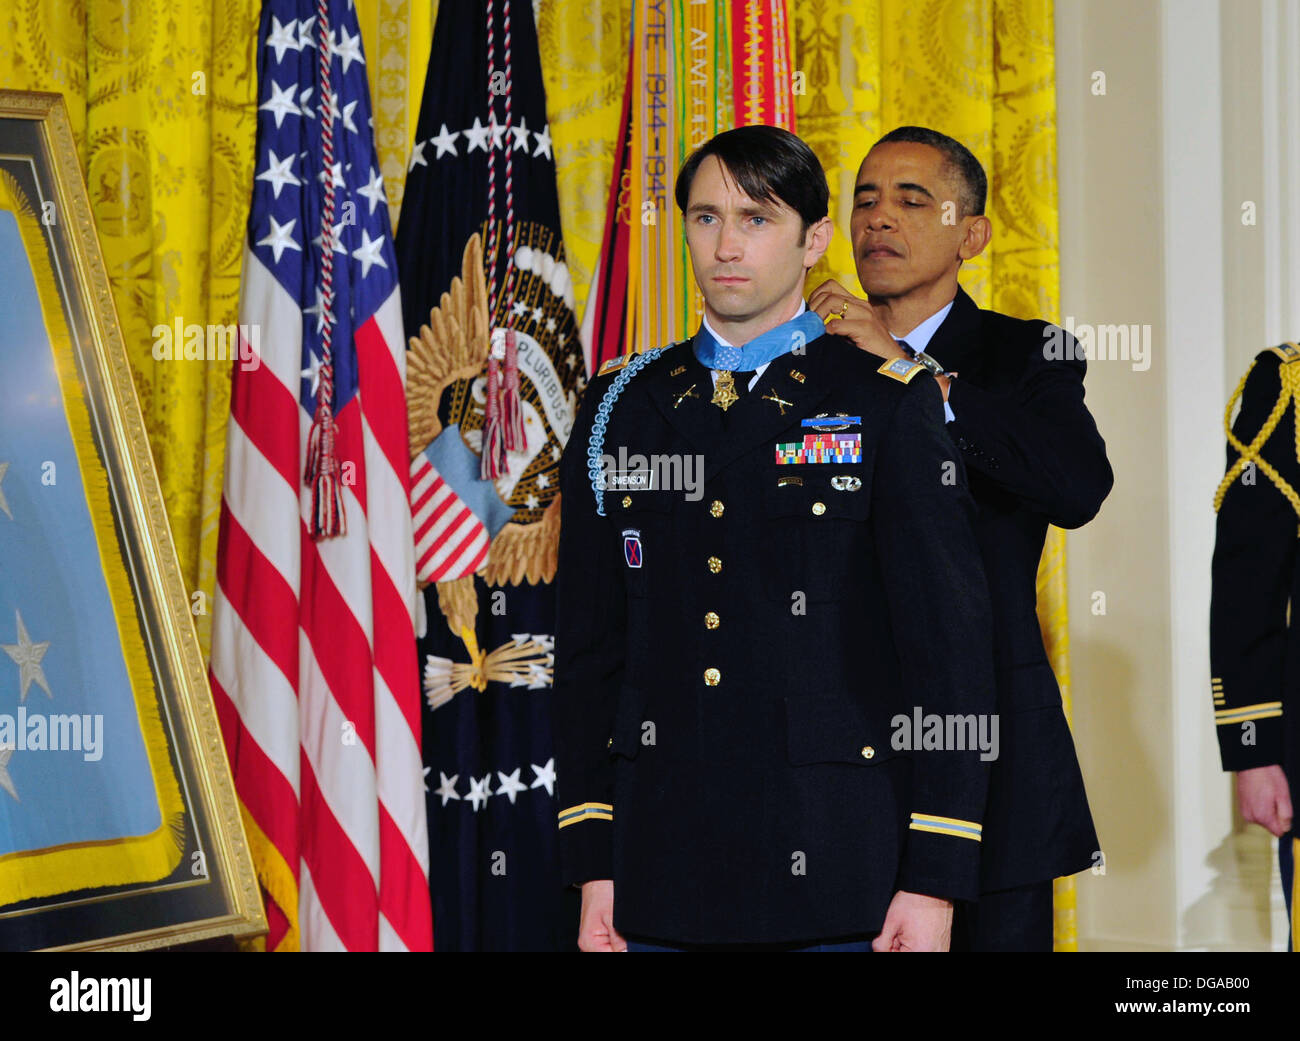 US President Barack Obama presents former US Army Capt. William D. Swenson with the Medal of Honor during a ceremony in the East Room of the White House October 15, 2013 in Washington, DC. The Medal of Honor is the nation's highest military honor. Stock Photo